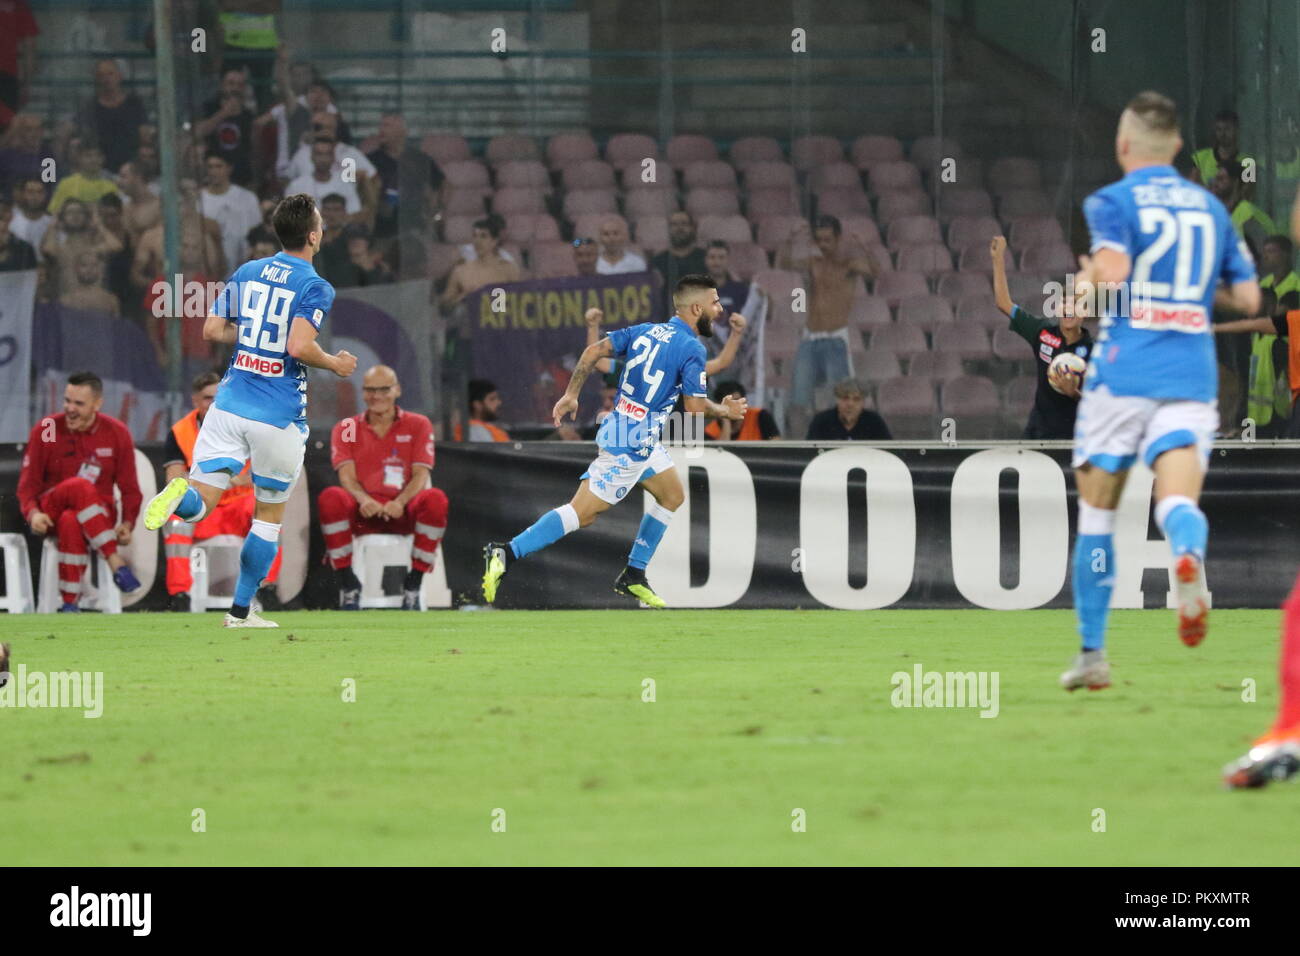 Naples, Italy. 15th September 2018. In the picture the Napoli player Lorenzo Insigne celebrates the goal made to Fiorentina.Stadium San Paolo Naples. 15th Sep, 2018. 09/15/2018 - Italy.final result SSC Napoli 1 AC Fiorentina 0. Credit: Fabio Sasso/ZUMA Wire/Alamy Live News Stock Photo